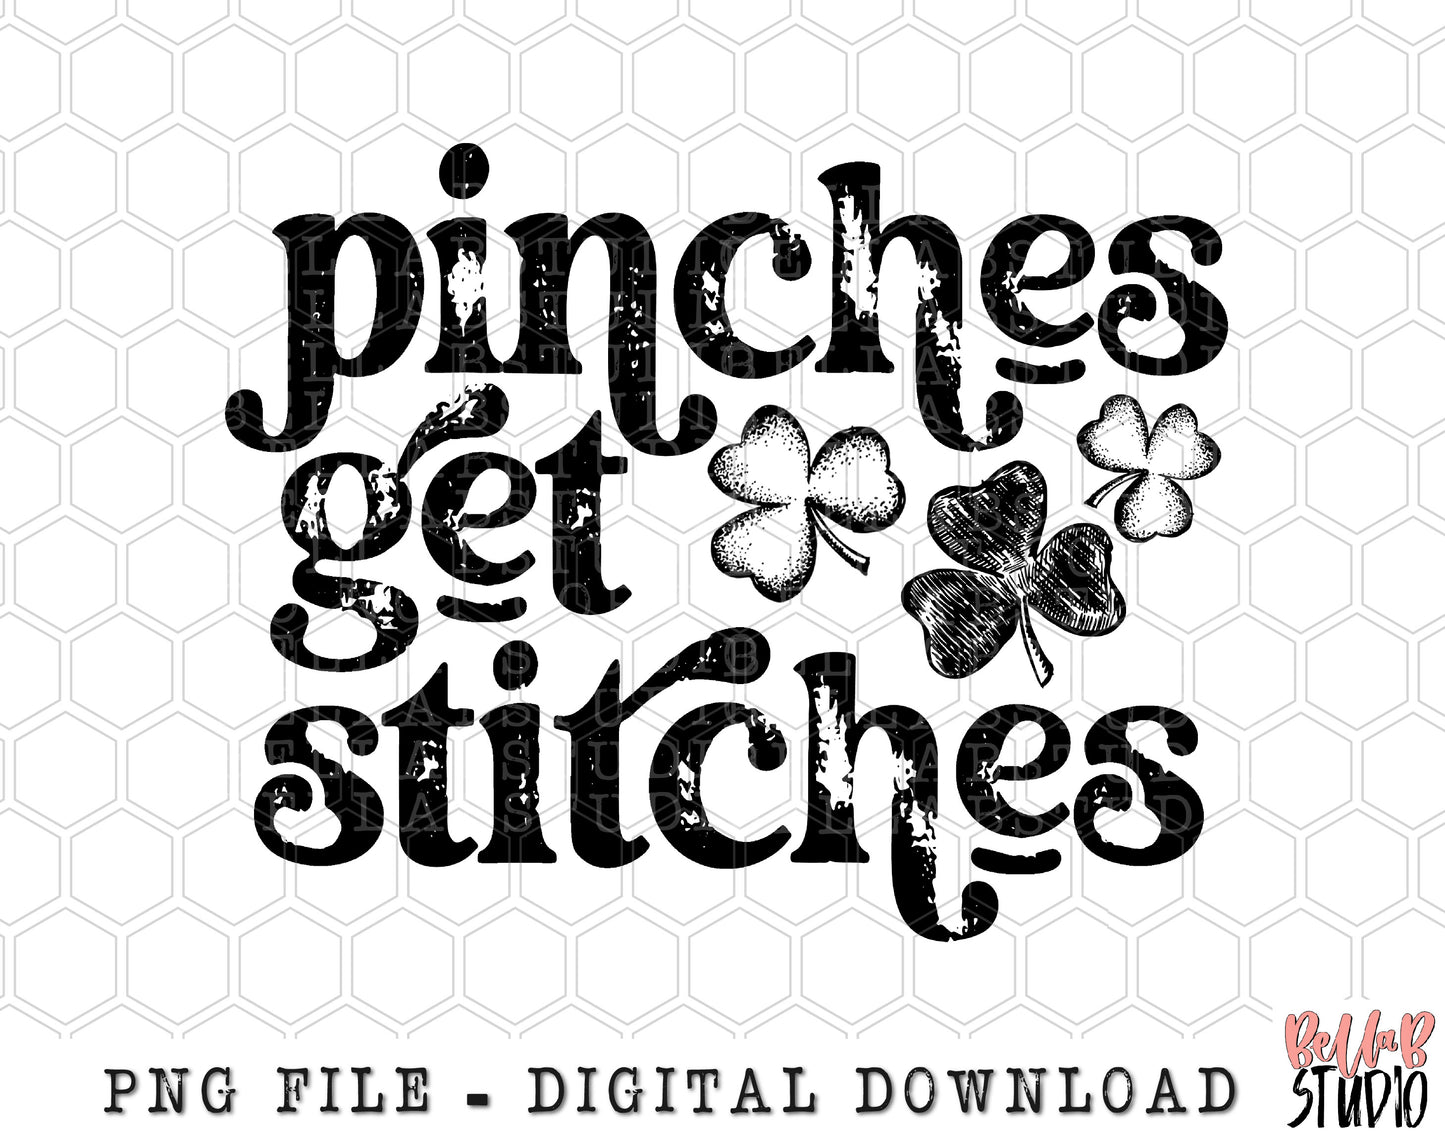 Pinches Get Stitches PNG Sublimation Design